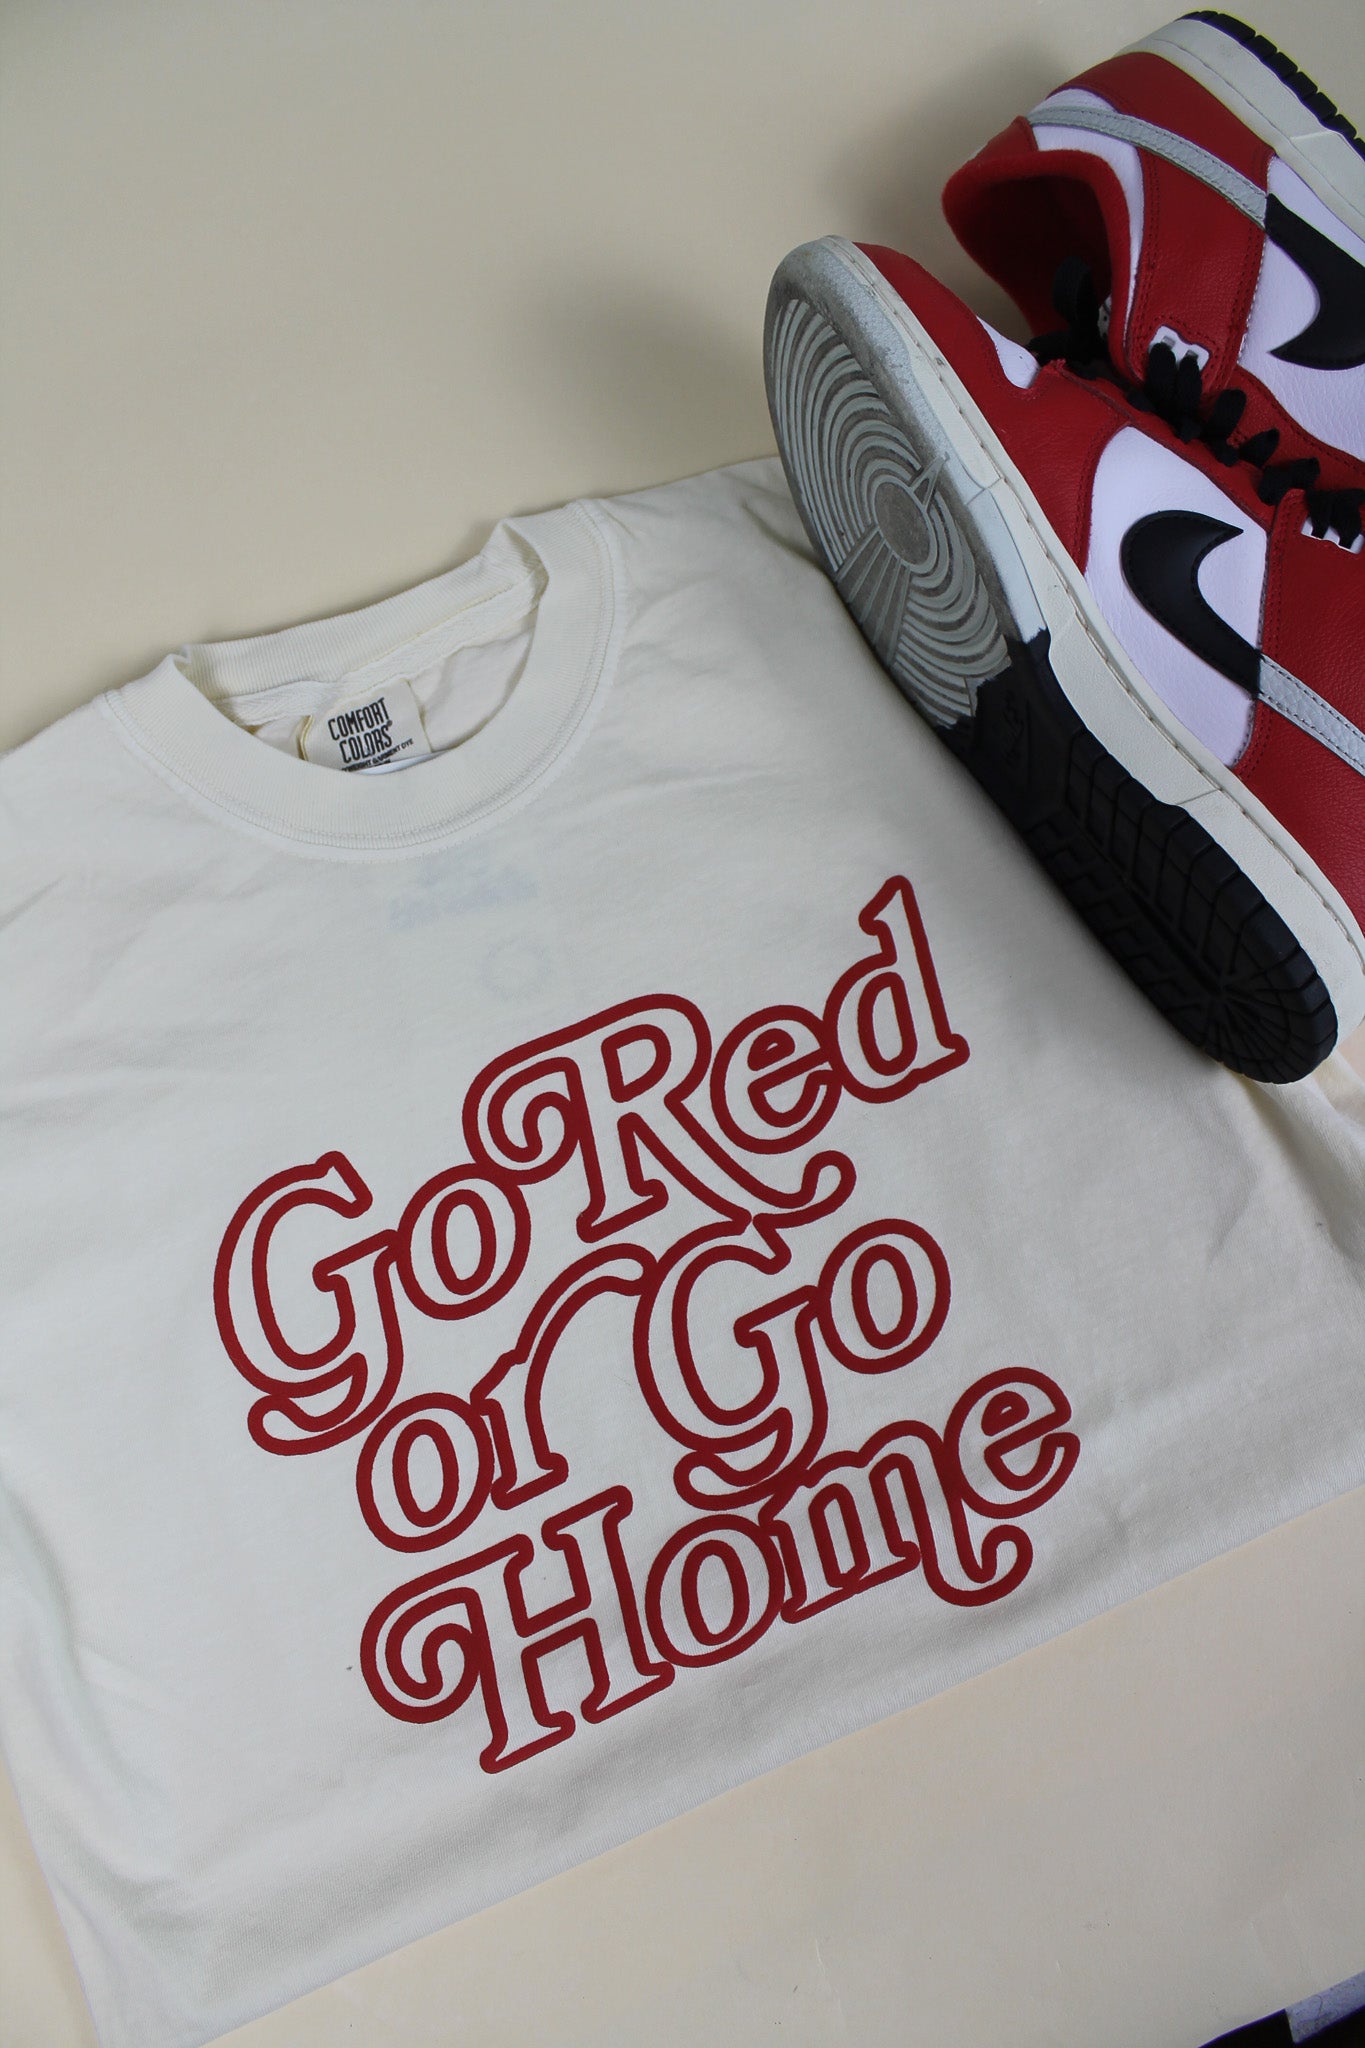 Go Red or Go Home Tee